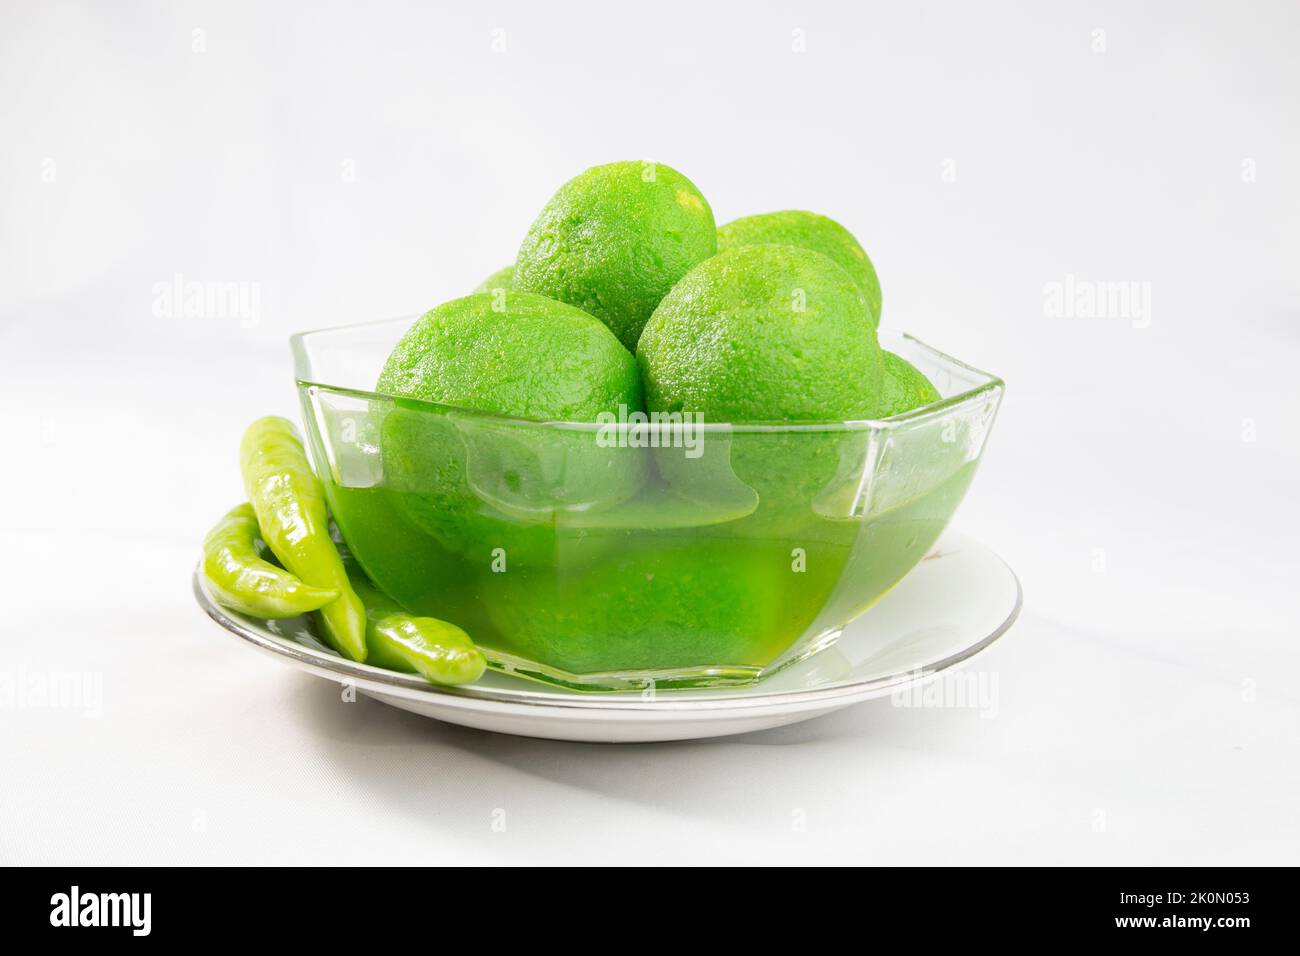 Chili sweets on bowl. green colored, chilli flavored, hot and sweet taste. unusual odd taste dessert. Stock Photo